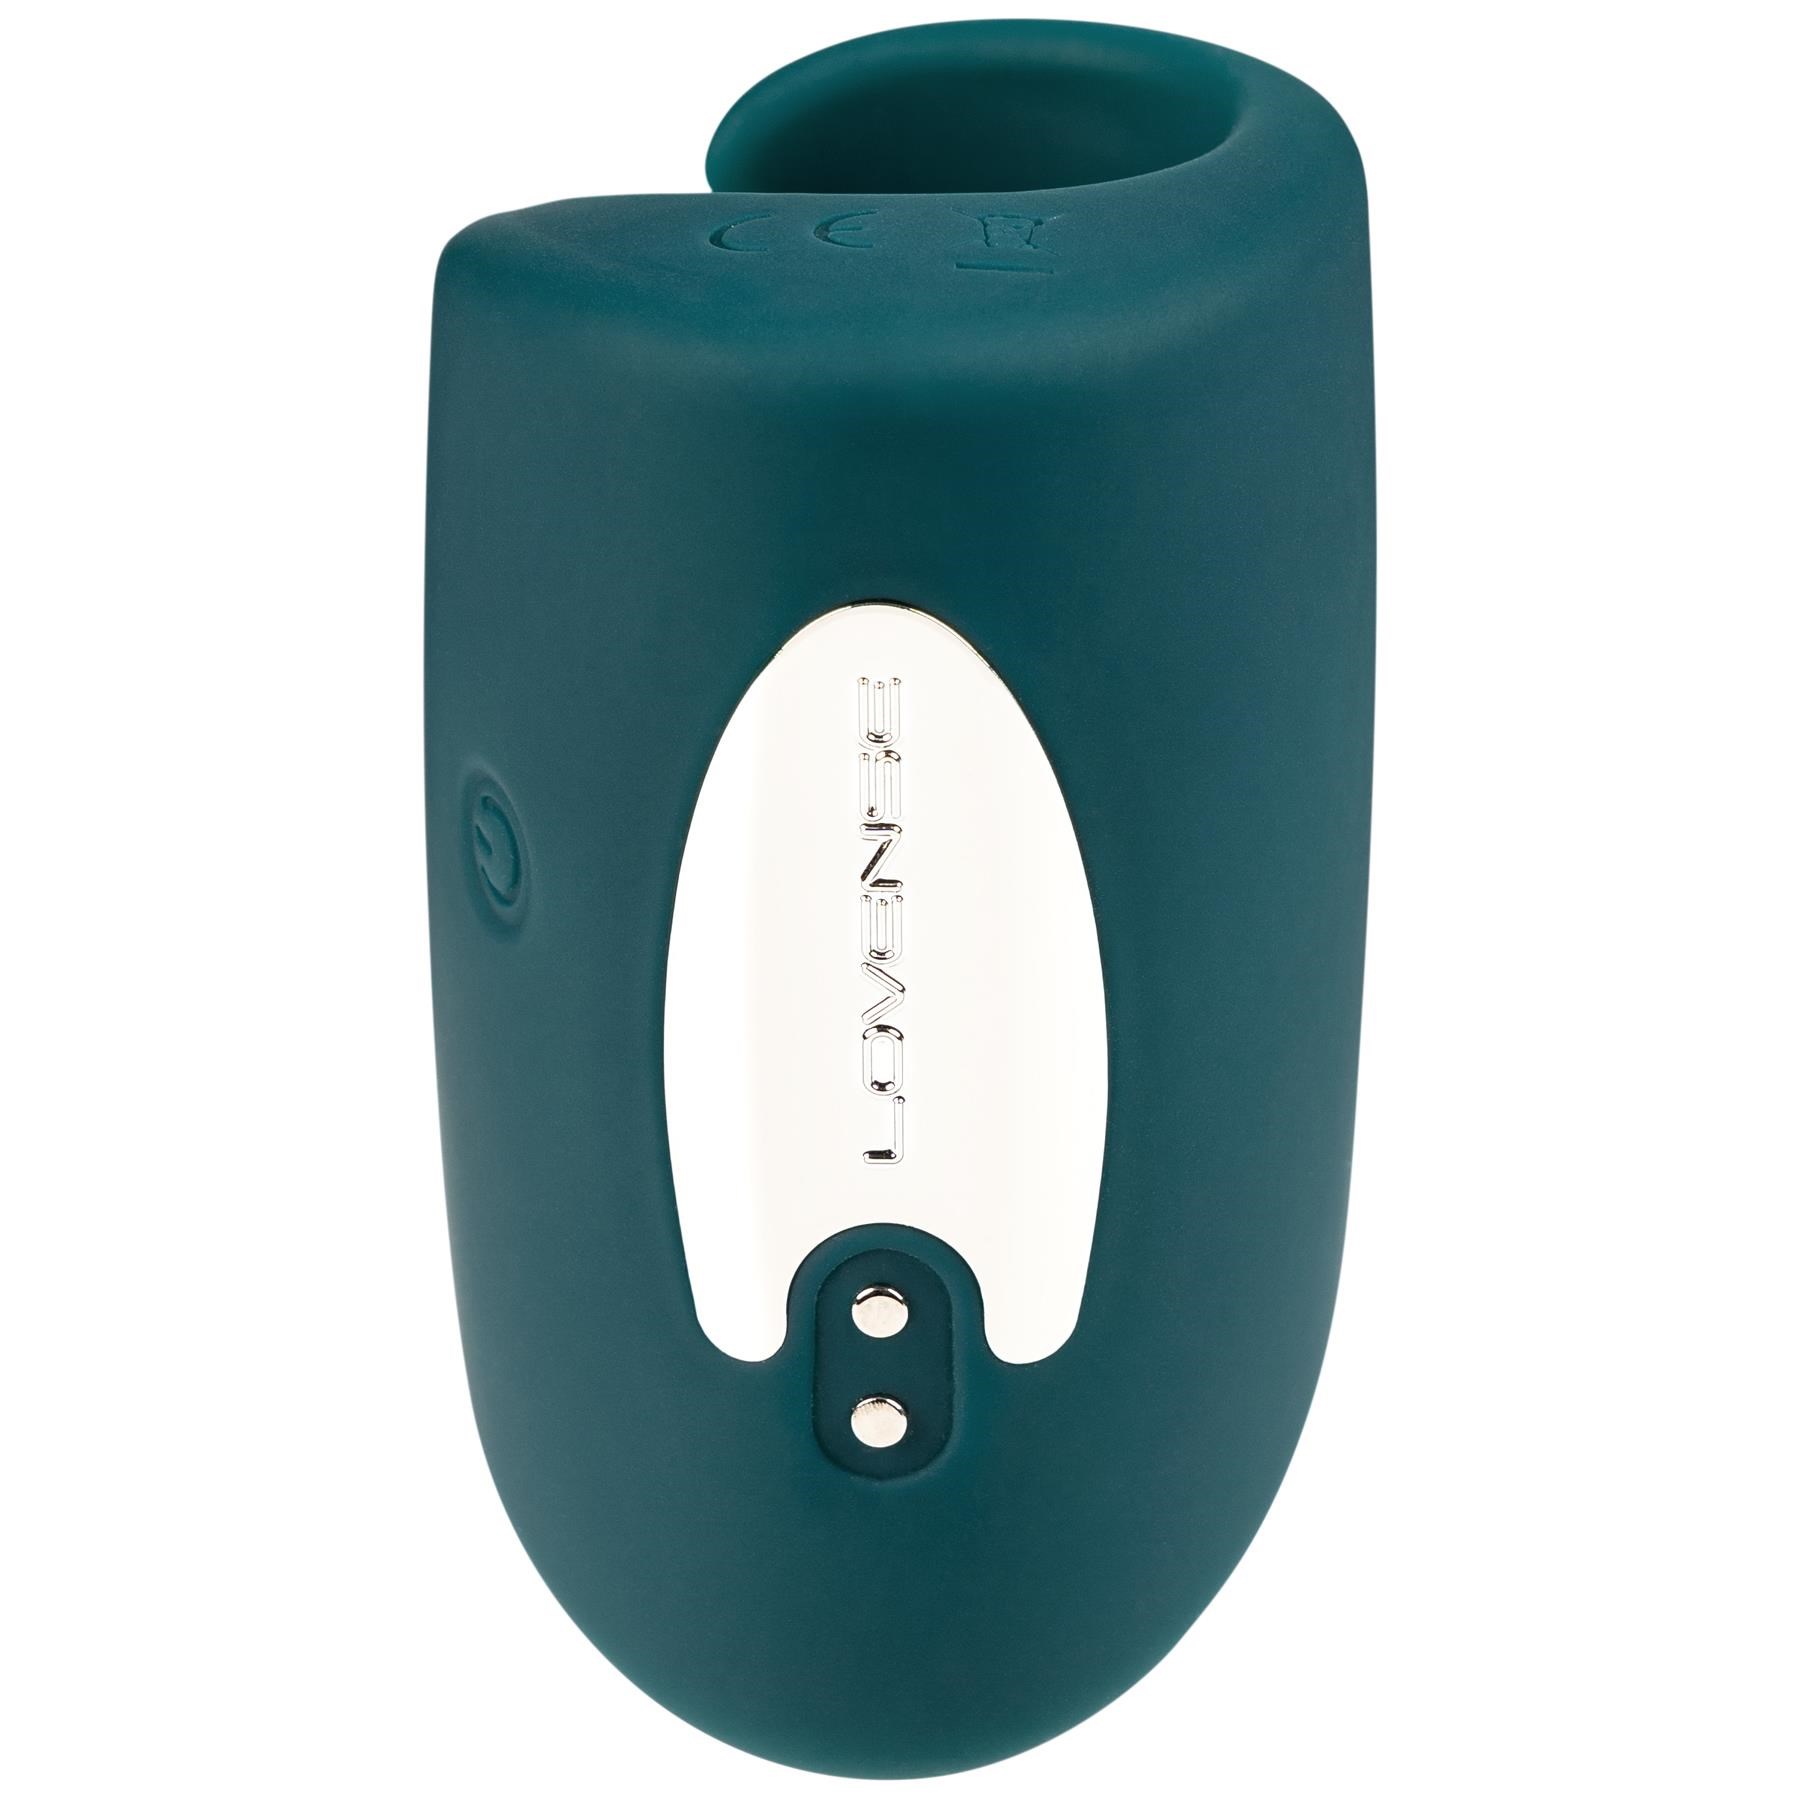 Lovense Gush Bluetooth Glans Massager - Product Shot - Front